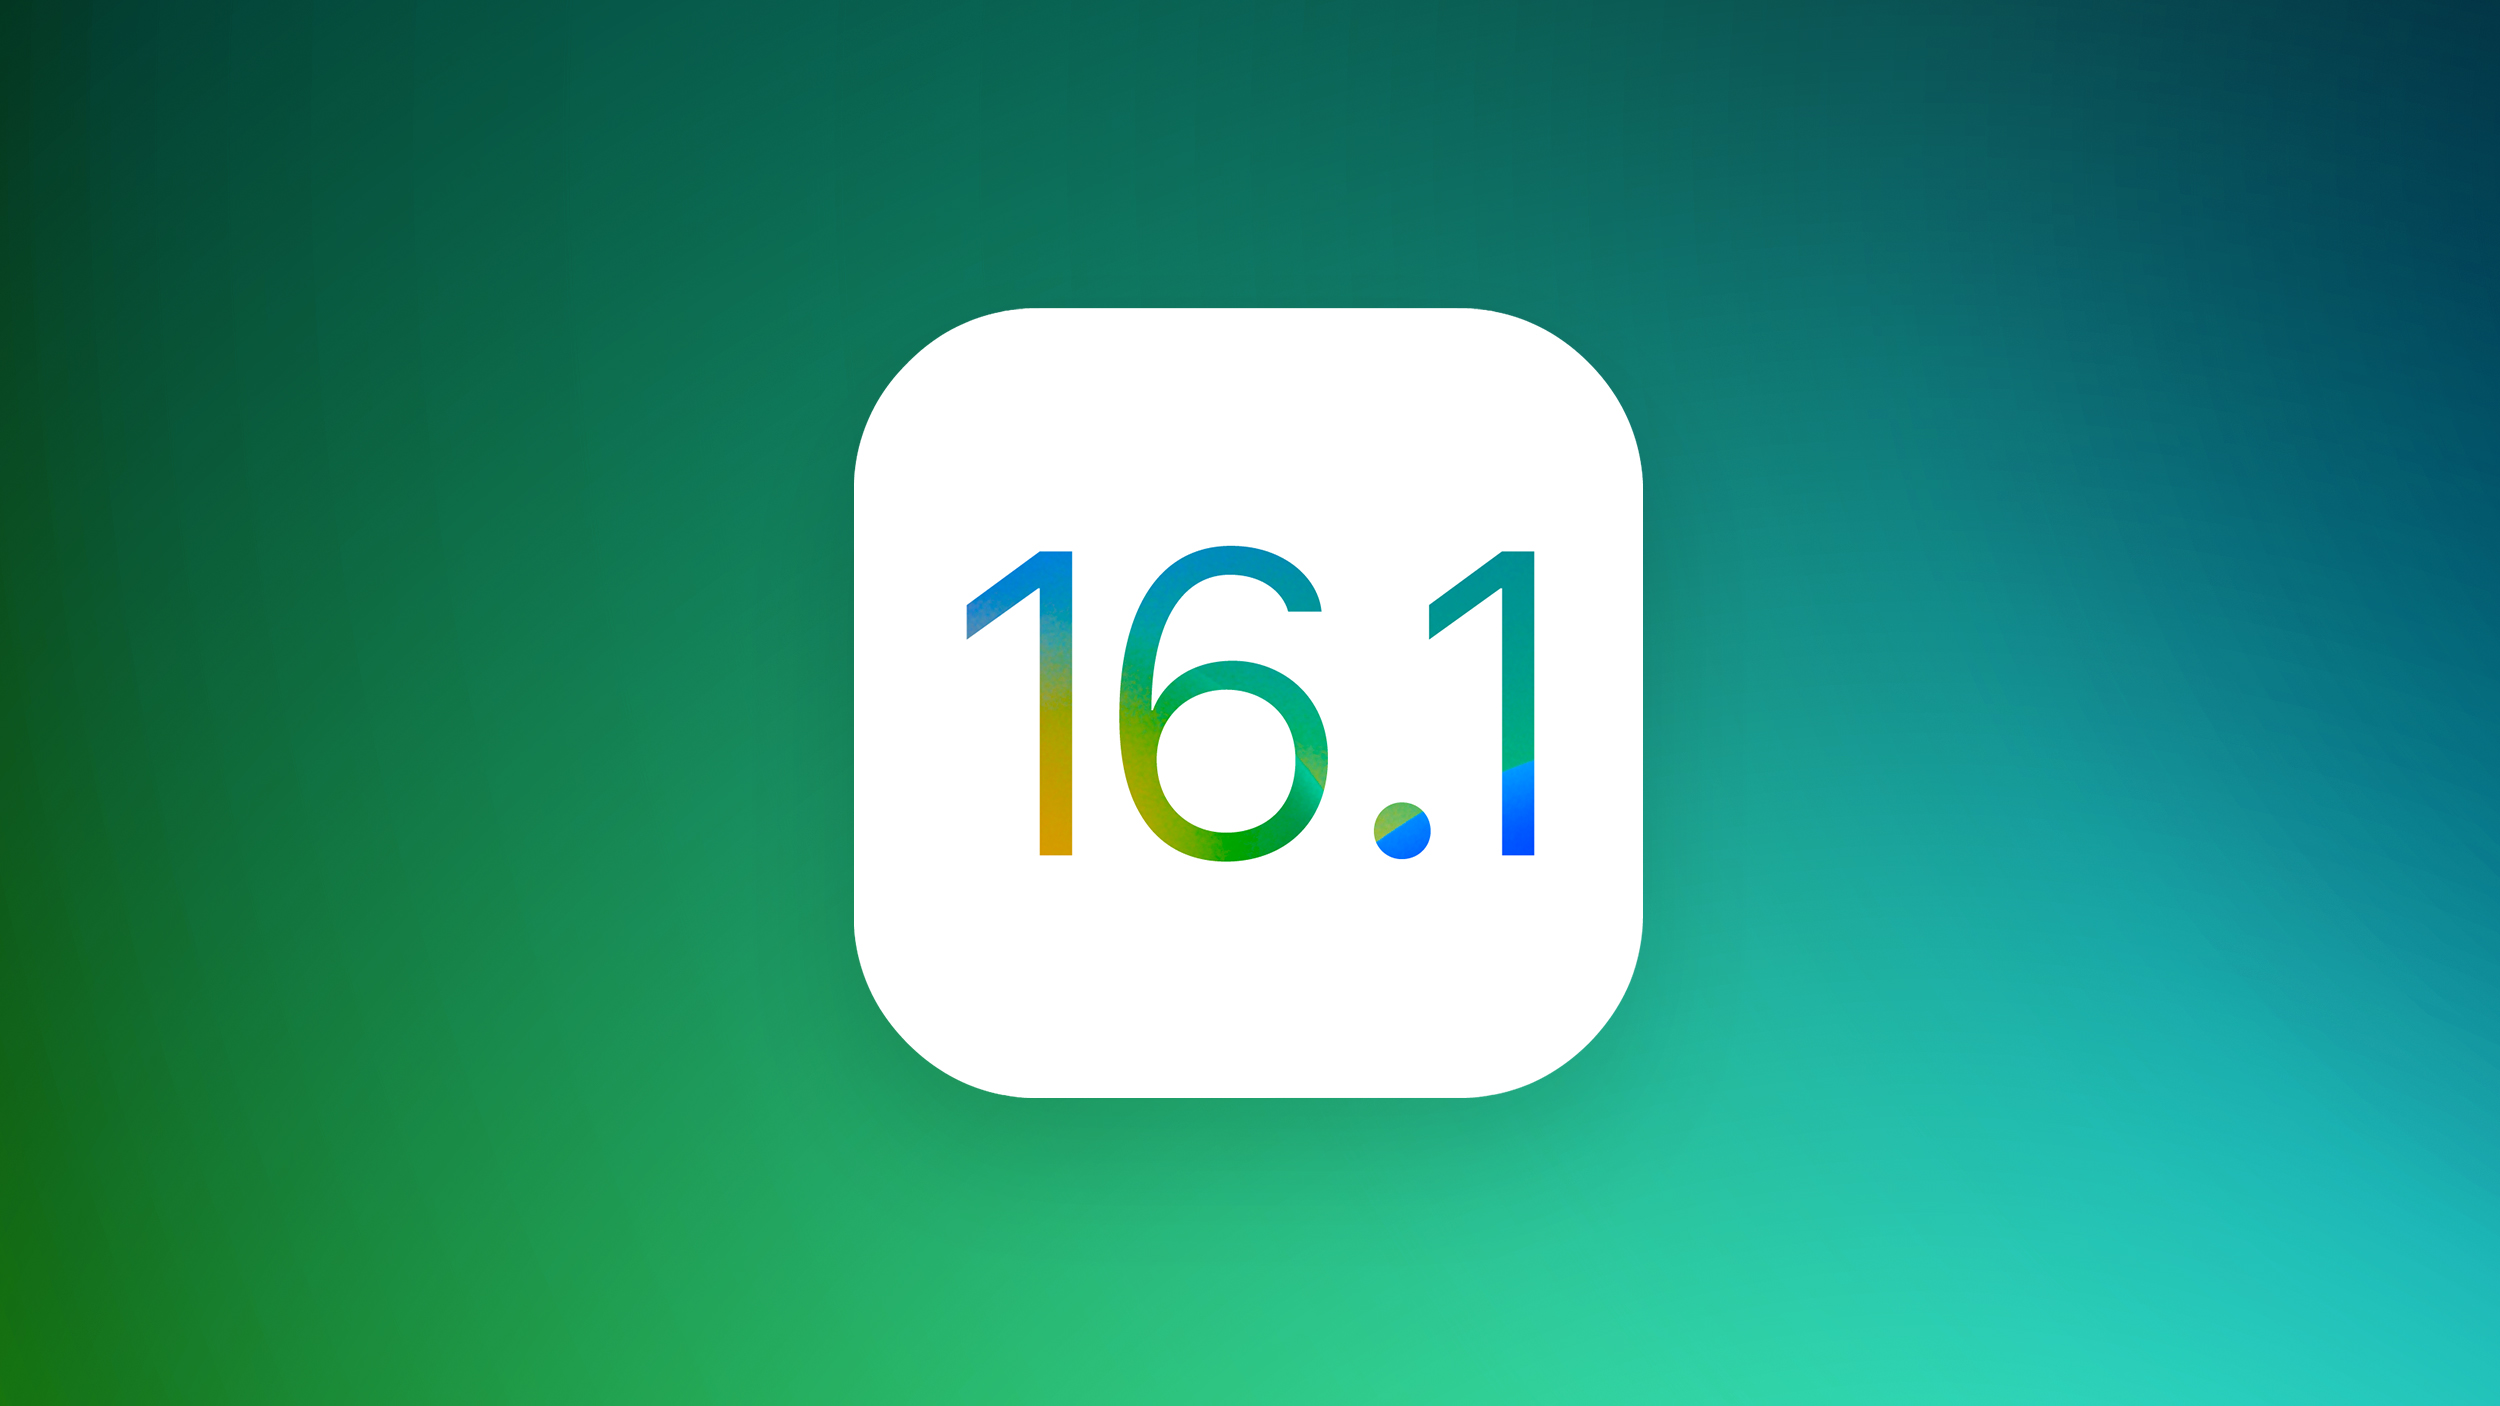 Apple Releases iOS 16.1 With Support for iCloud Shared Photo Library, Matter, Live Activities and More